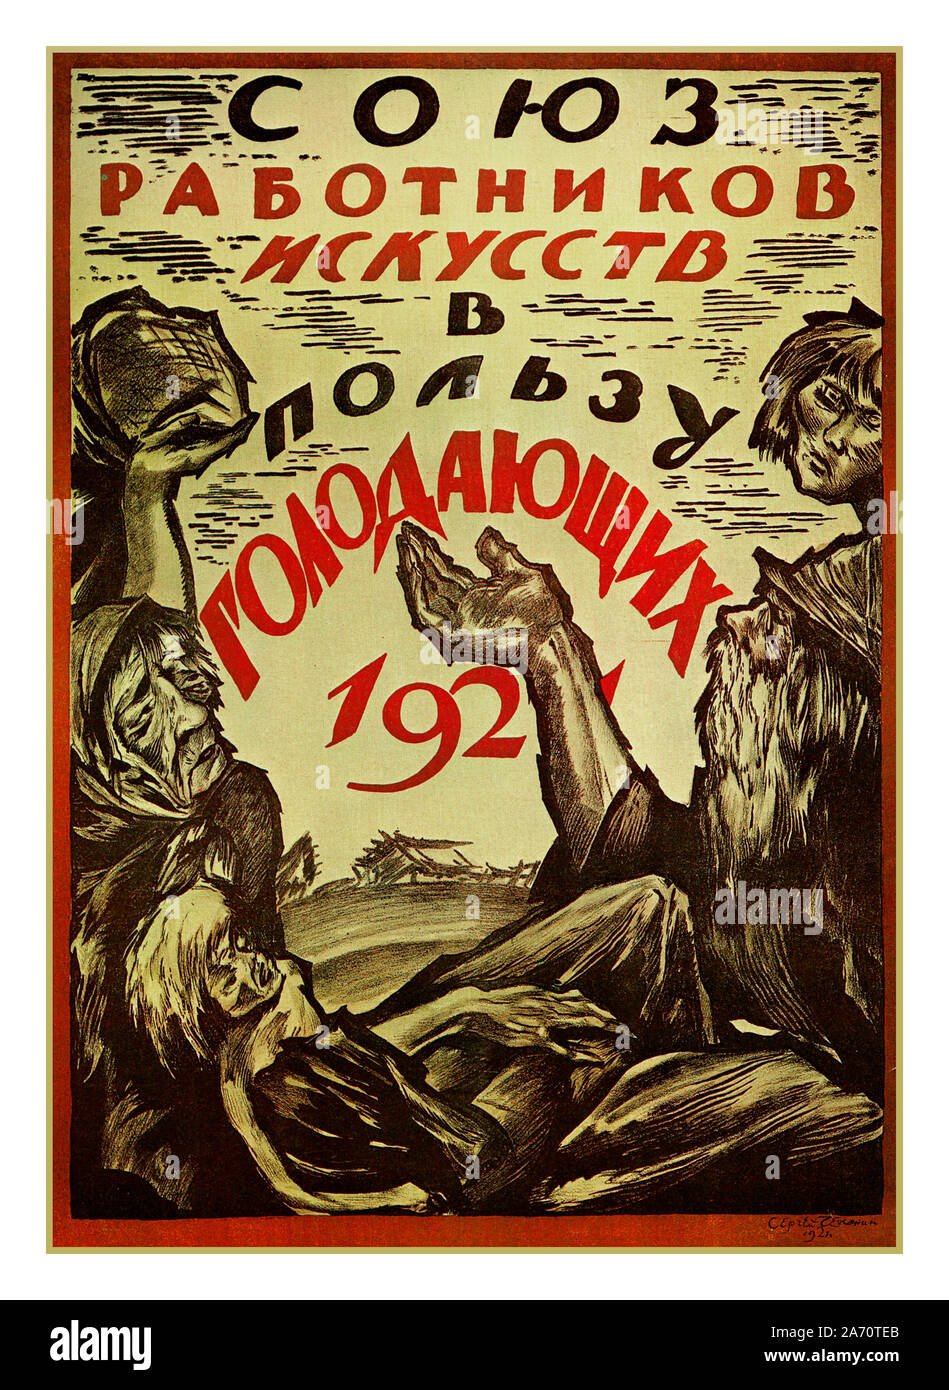 1920’s Vintage Russian appeals poster by Sergei Chekhonin, The Union of Art Workers Aids the Starving. Poster, 1921. ‘In 1921 the Volga region was hit by a terrible famine – the result of an unprecedented drought. Posters, slogans, and newspaper articles called on people to help the starving and to share their last crust of bread with them. People did everything they could and more.’ Stock Photo